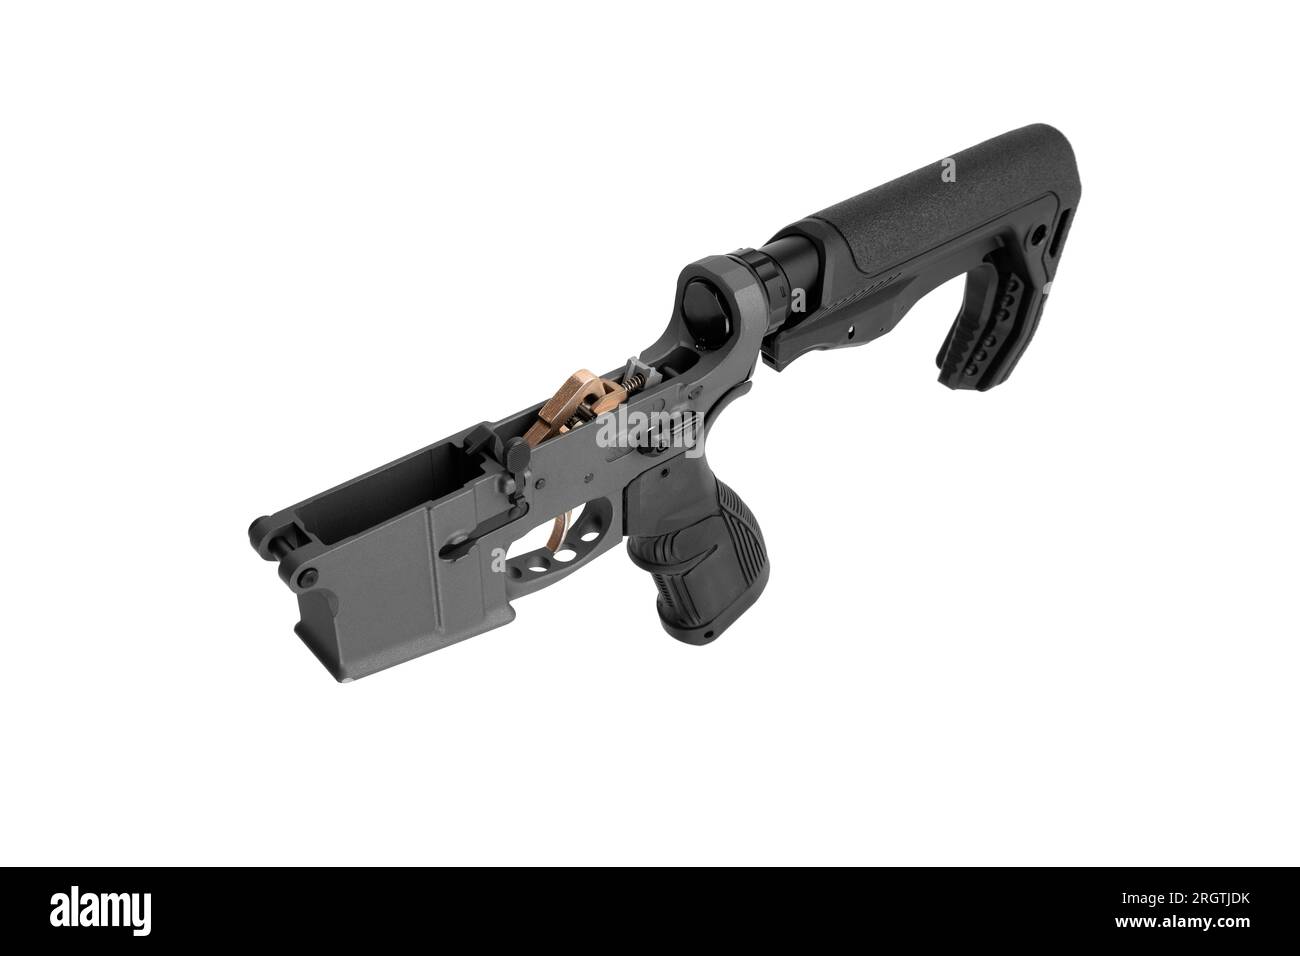 AR15 lower receiver iand buffer spring. Bottom half of a modern assault rifle. Isolate on white background. Stock Photo